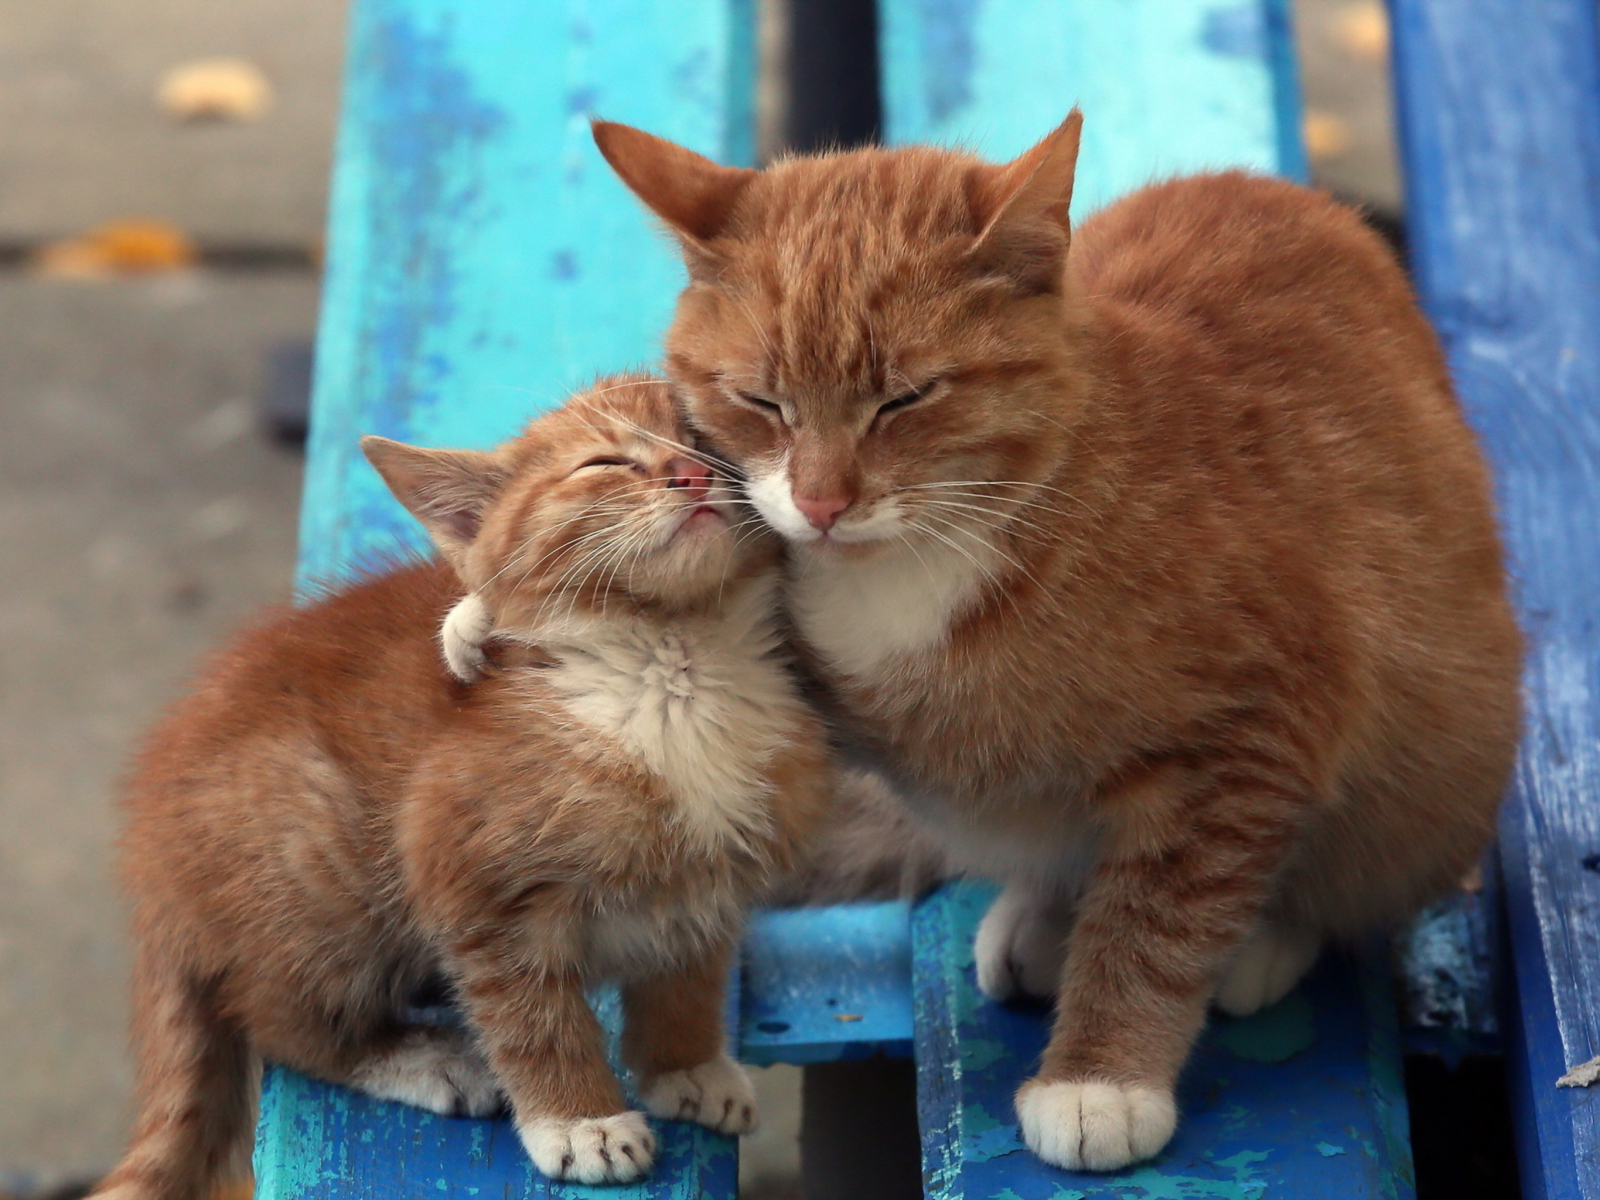 Cats Hugging On Bench wallpaper 1600x1200